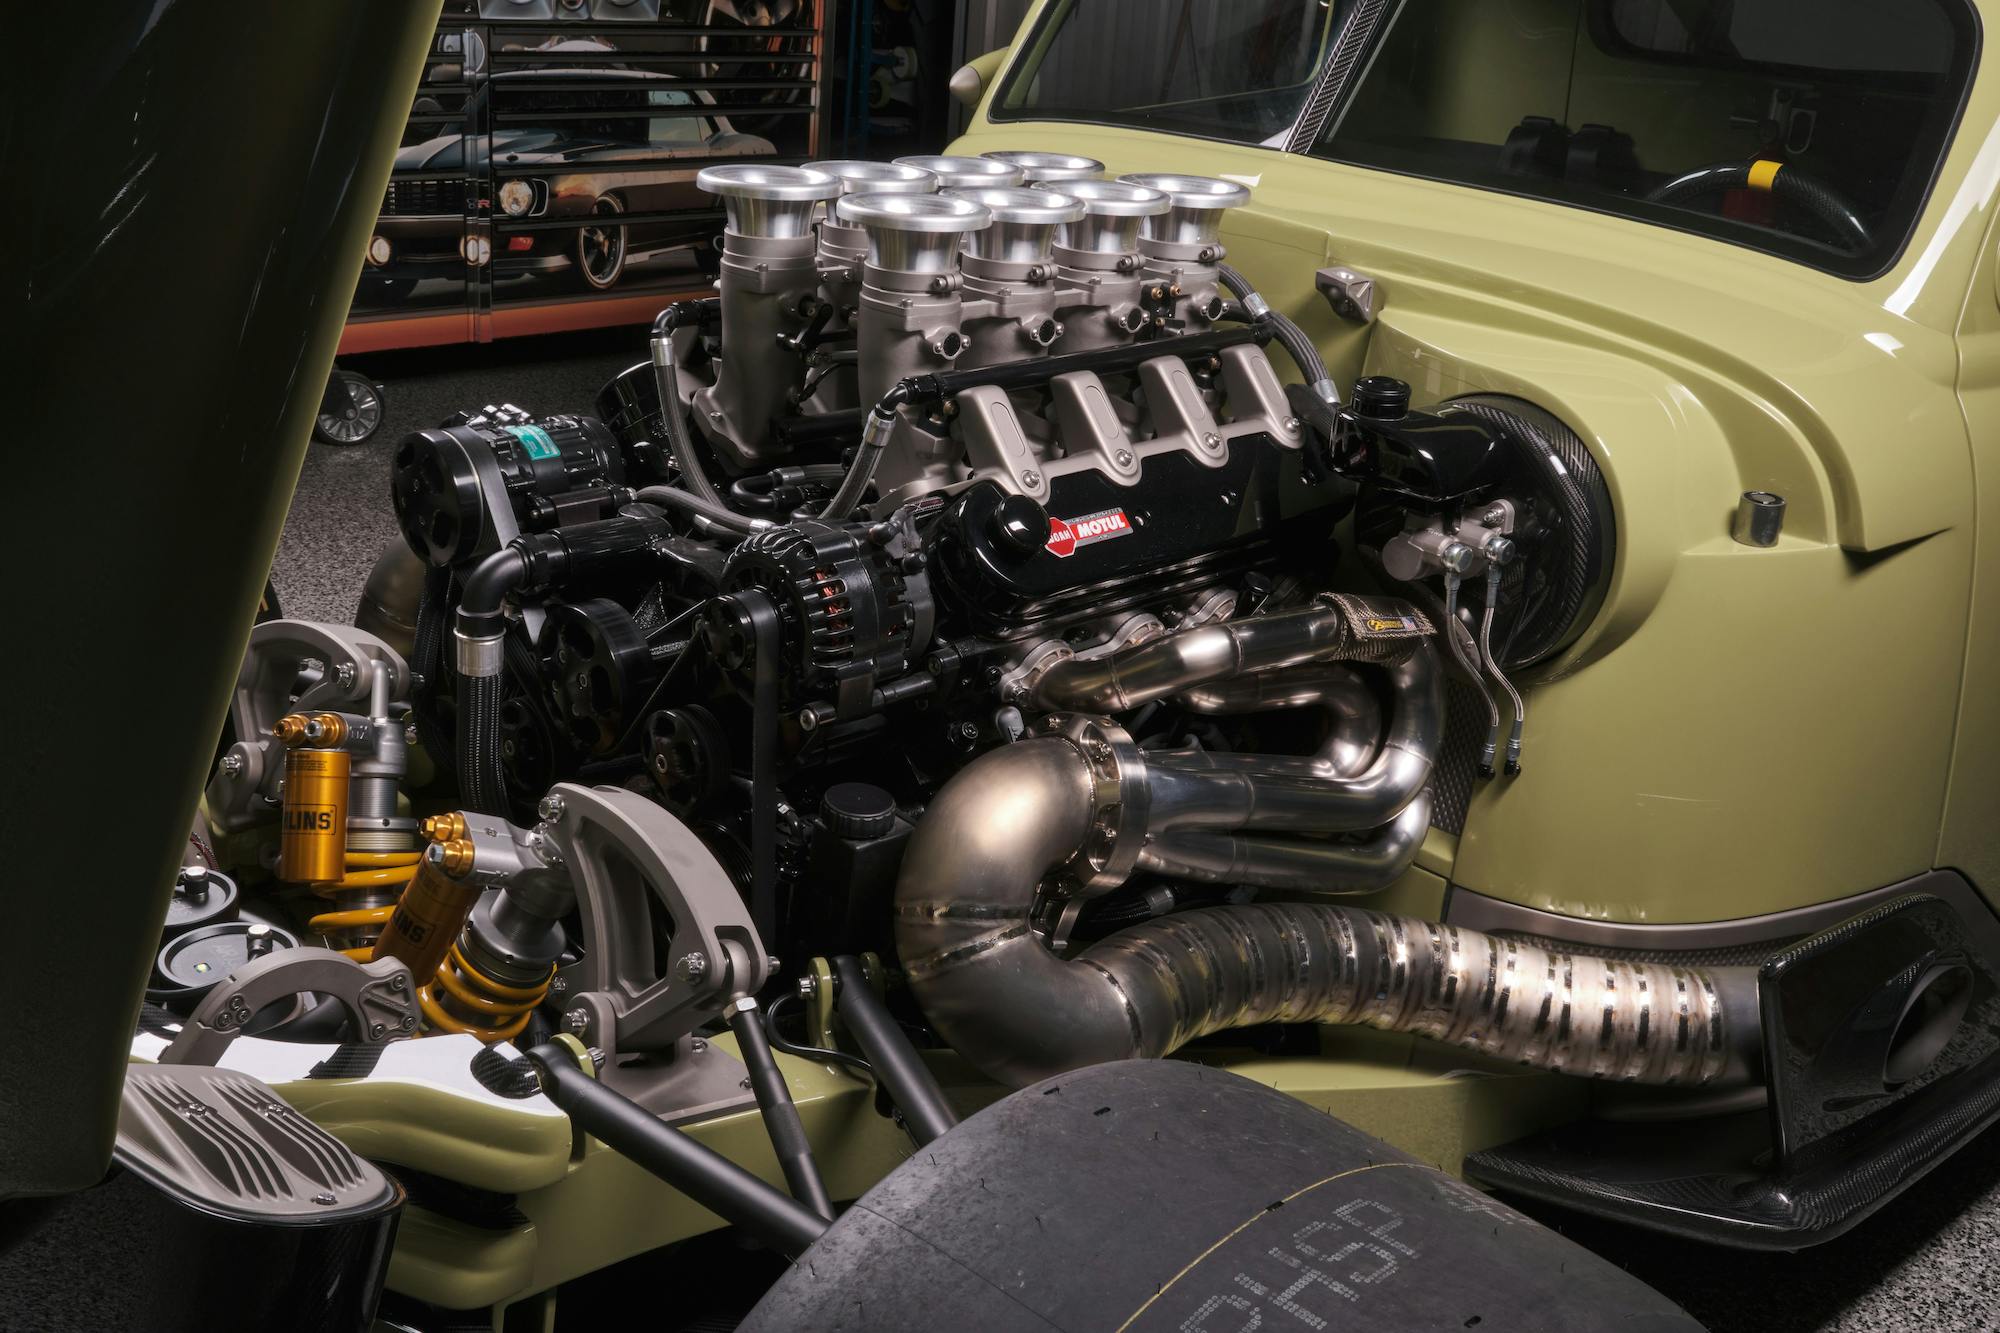 Enyo 1948 Chevy Super Truck engine bay